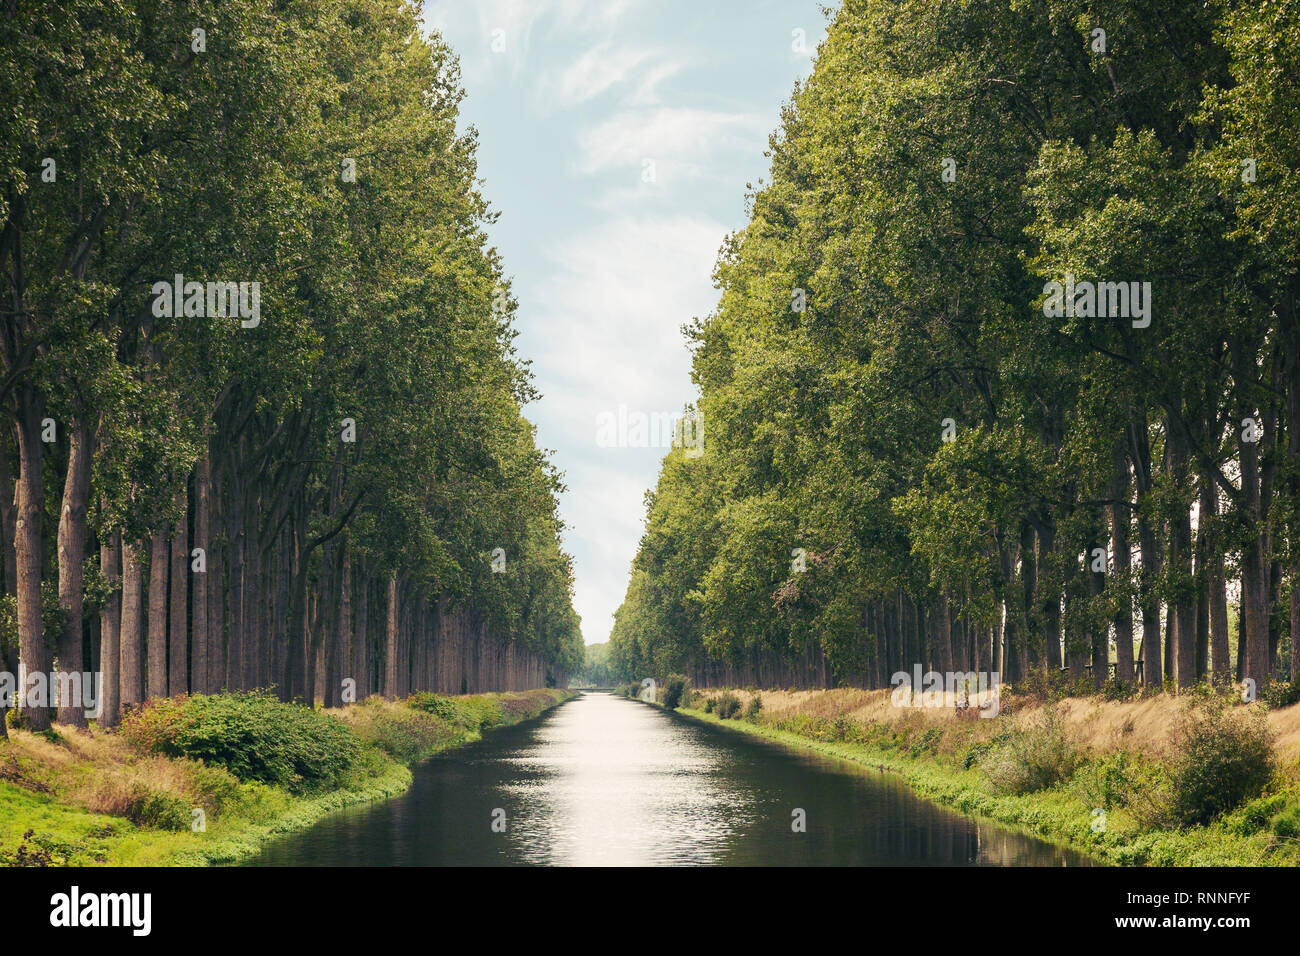 The Damme Canal surrounded by trees in summer in the Belgian province of West Flanders near the city of Brugge Stock Photo